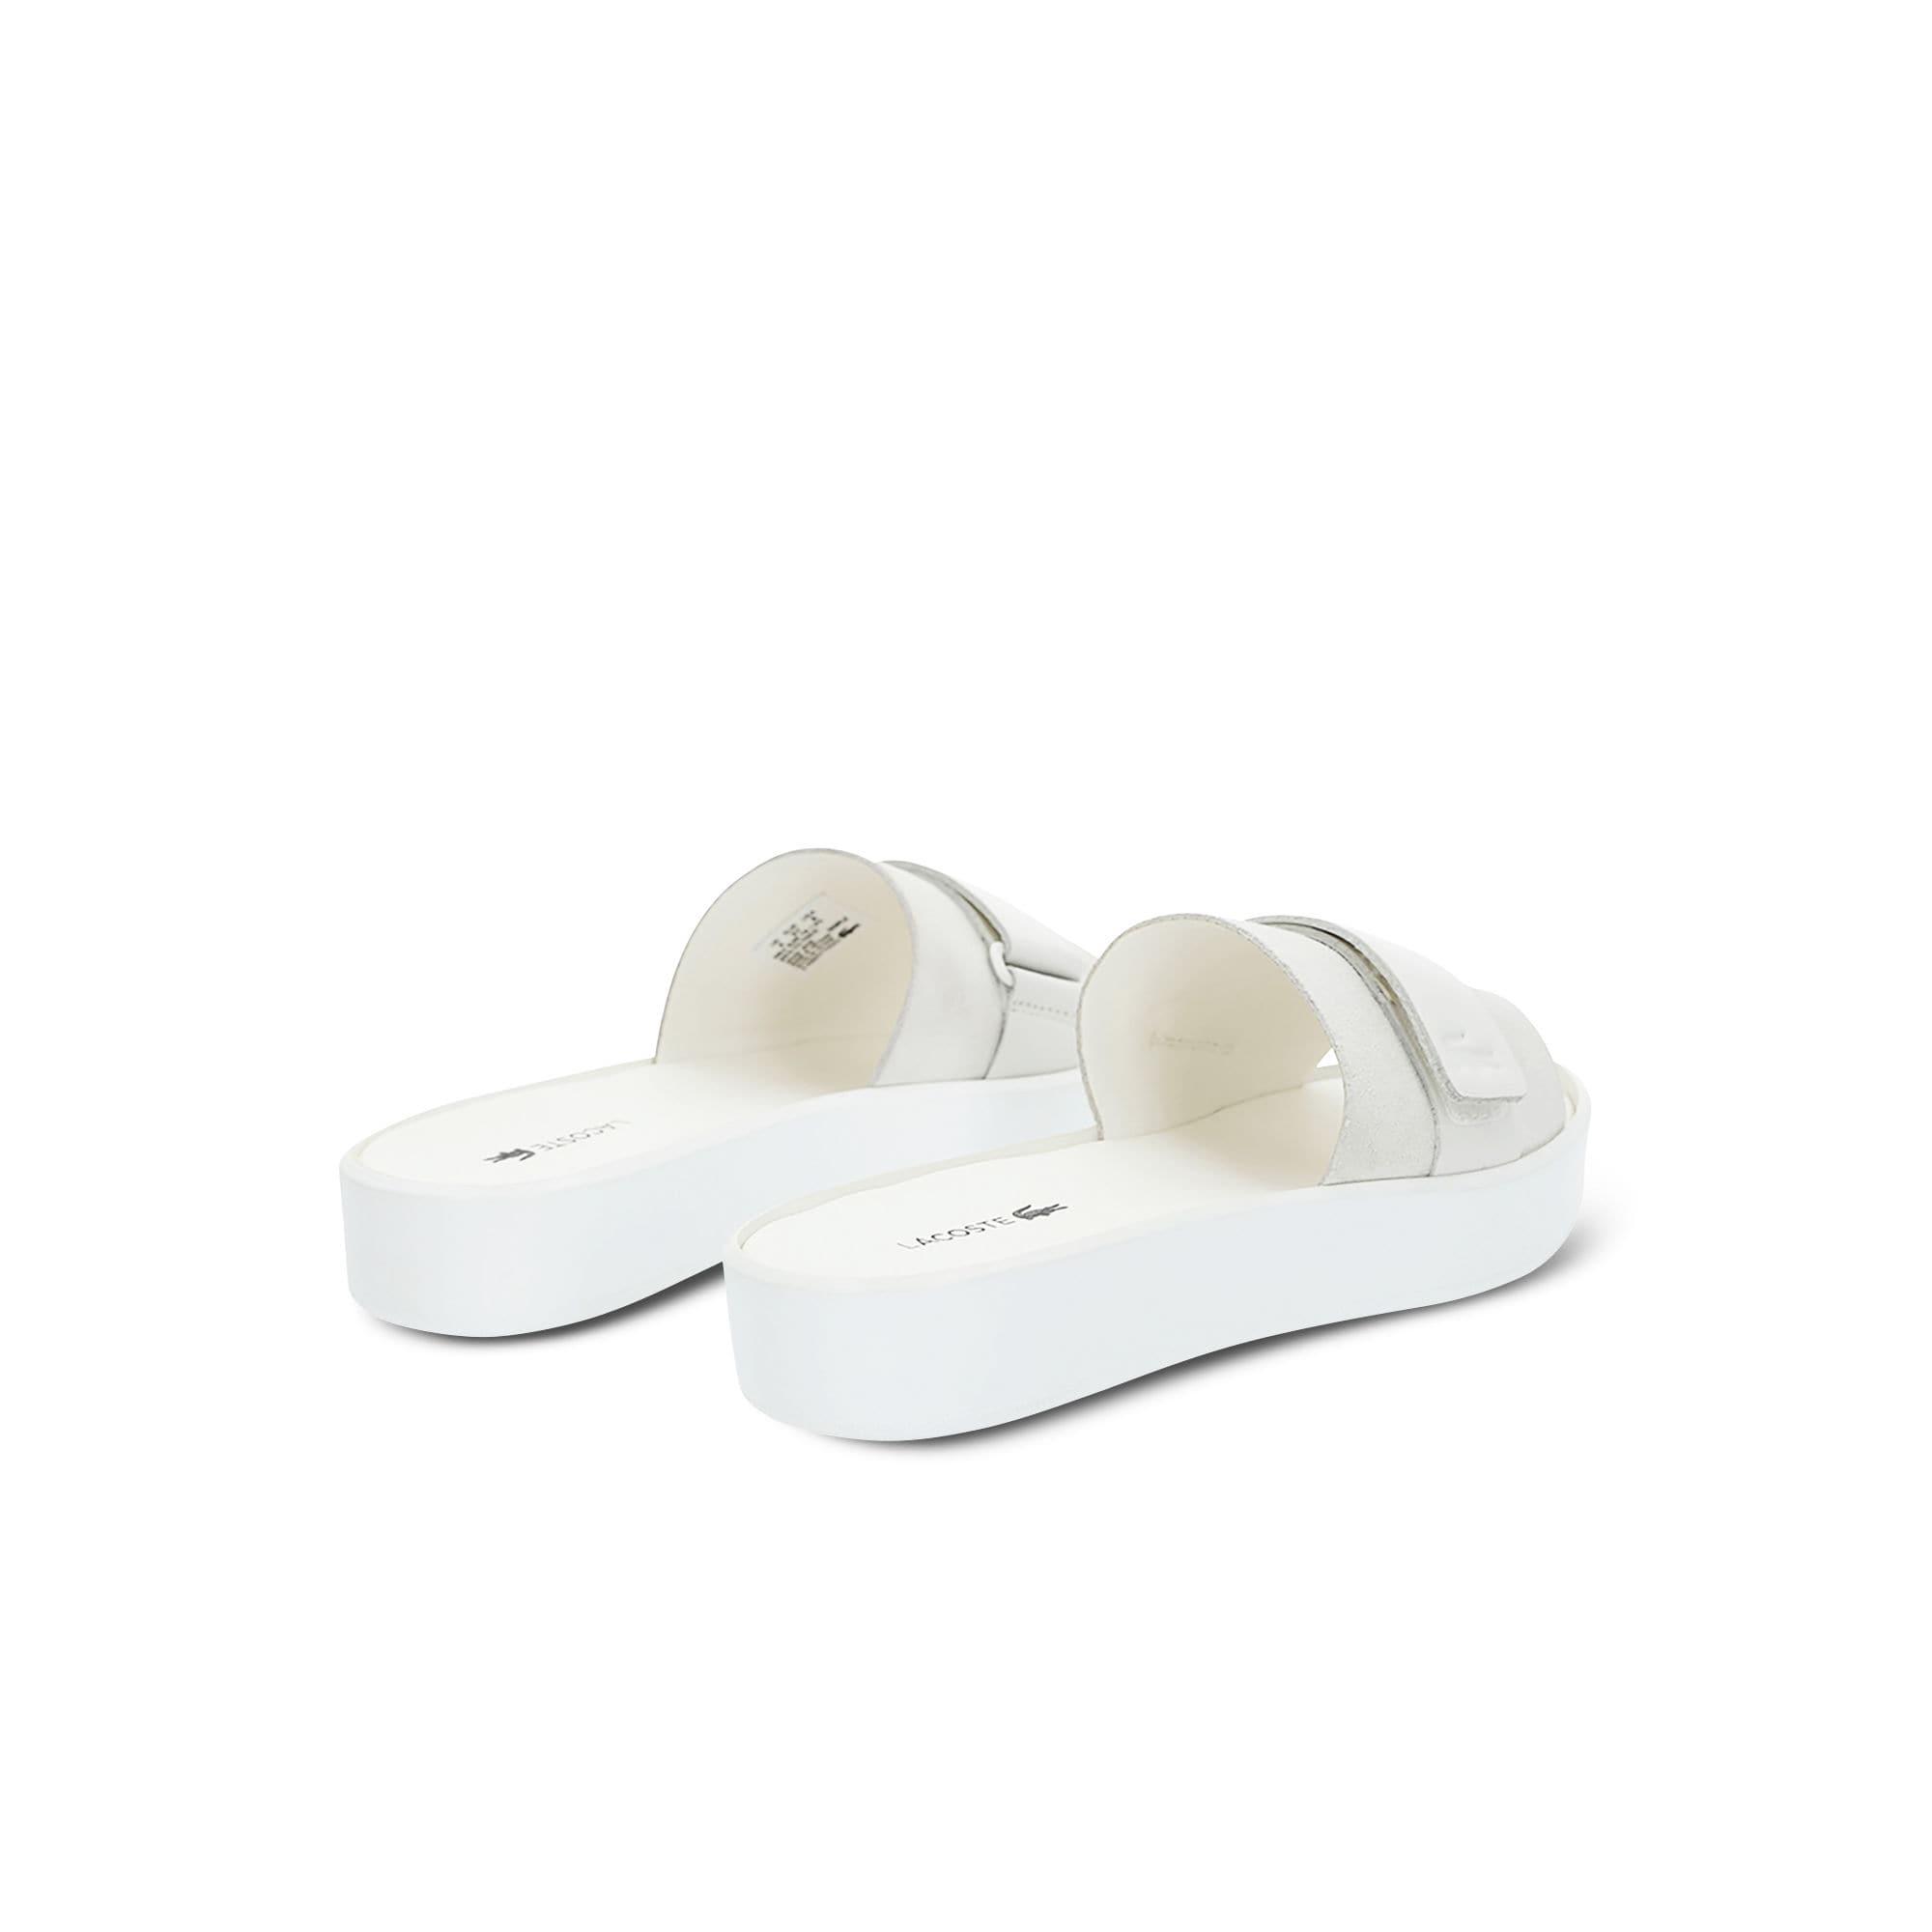 lacoste pirle sandals